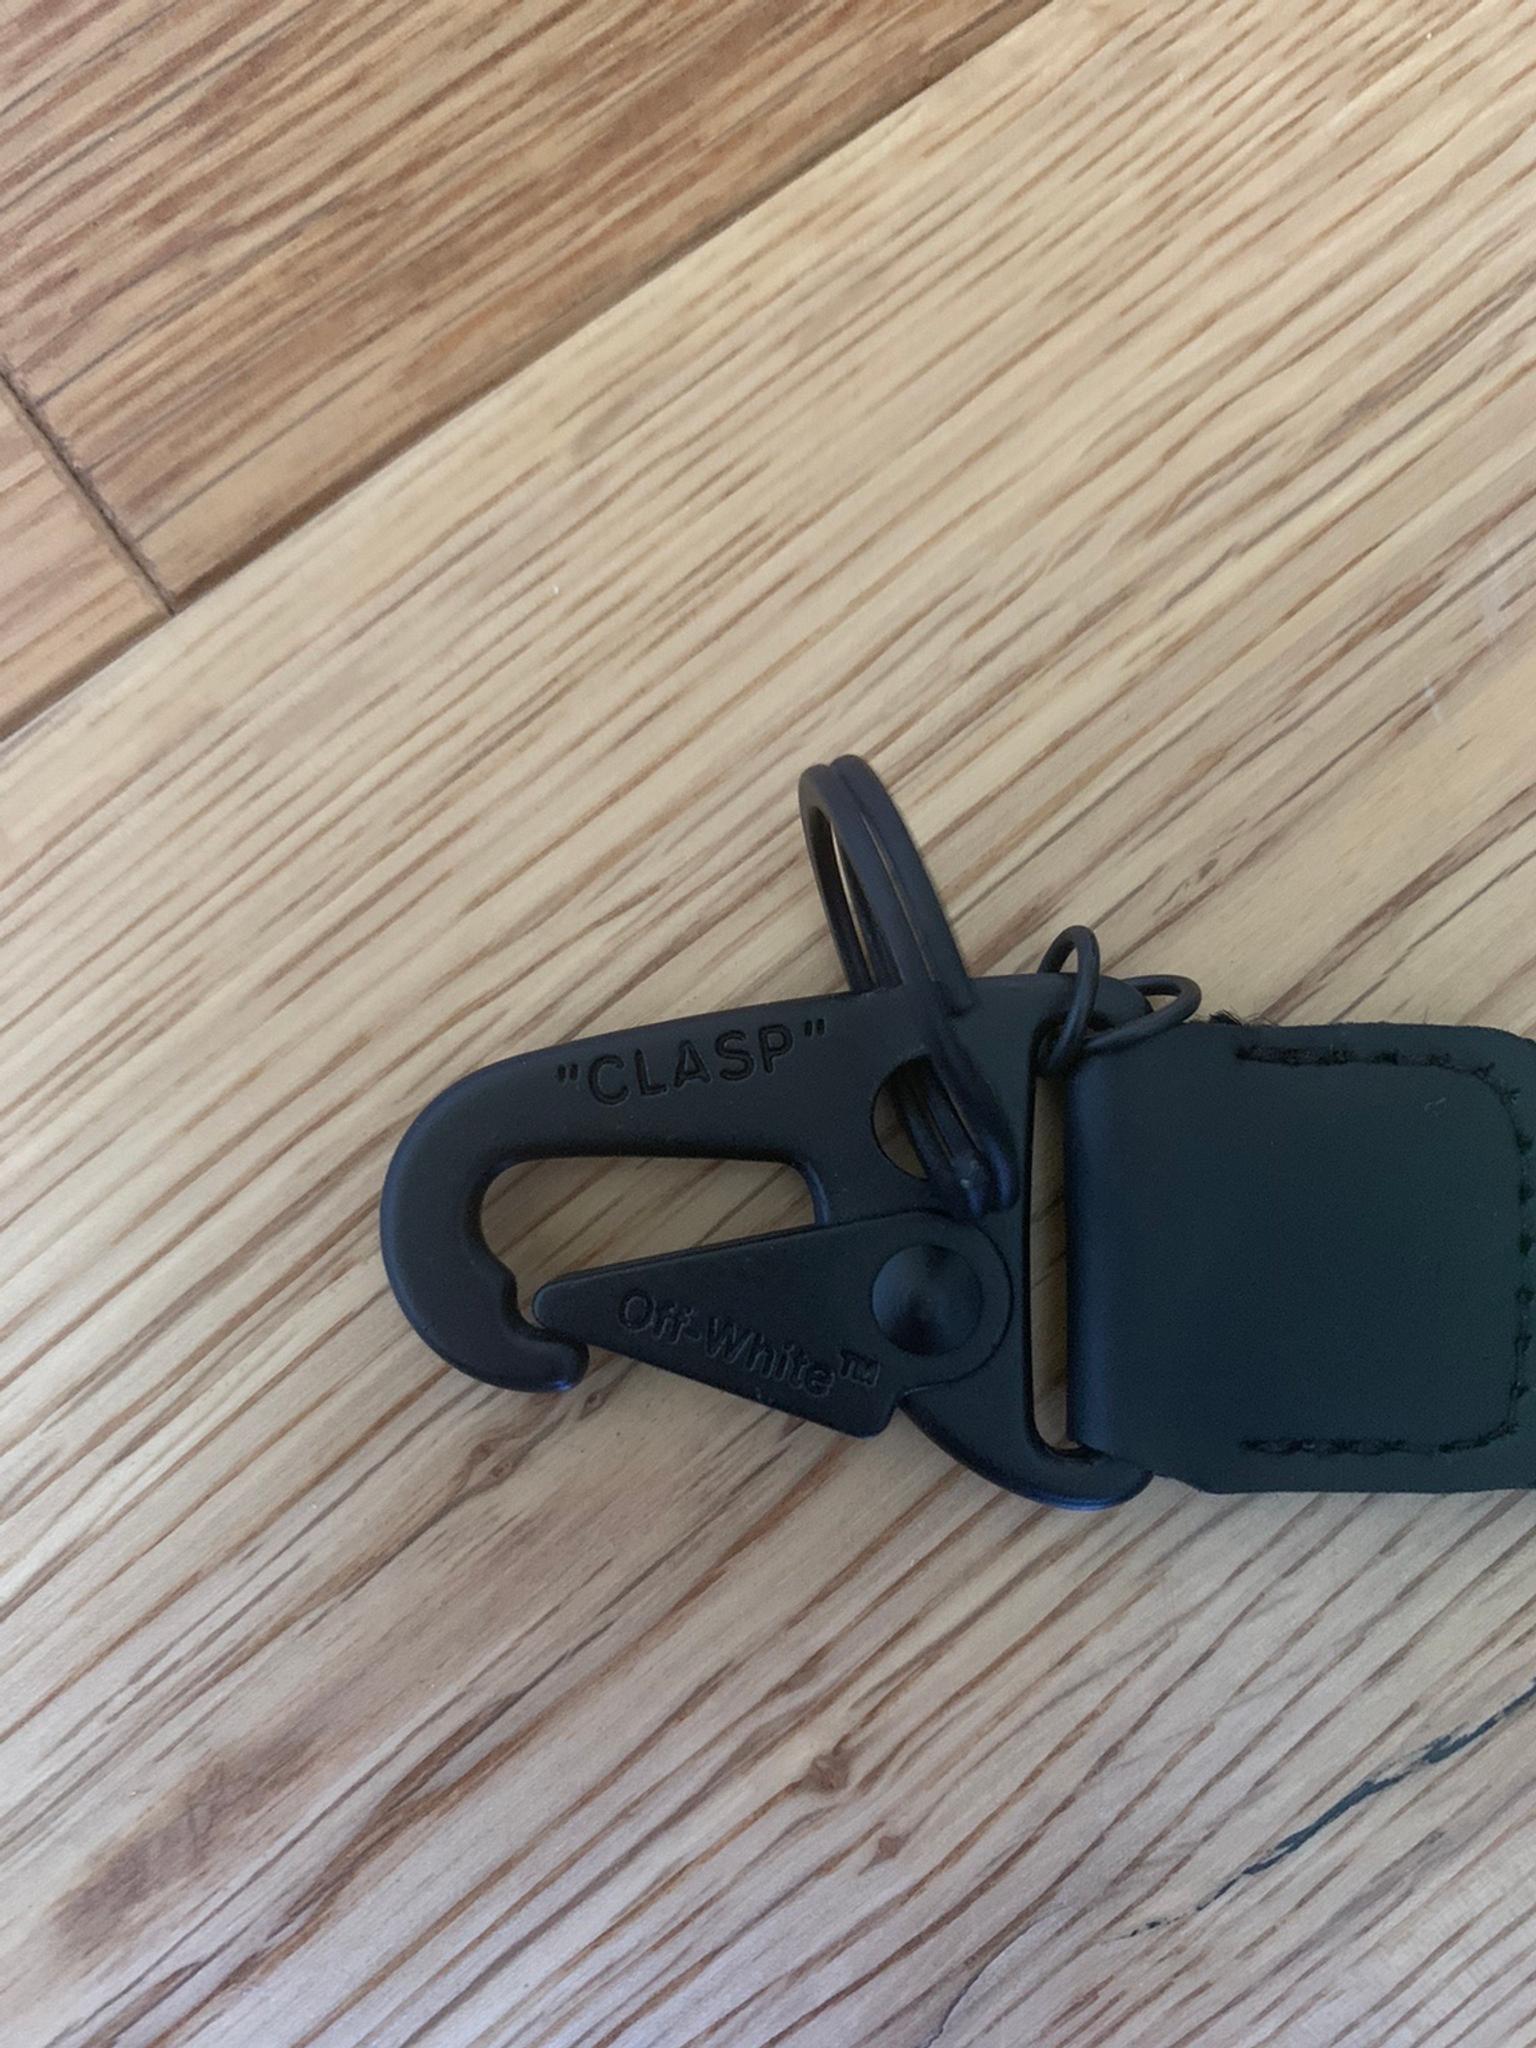 Off white keychain in GU46 Surrey Heath for £35.00 for sale | Shpock